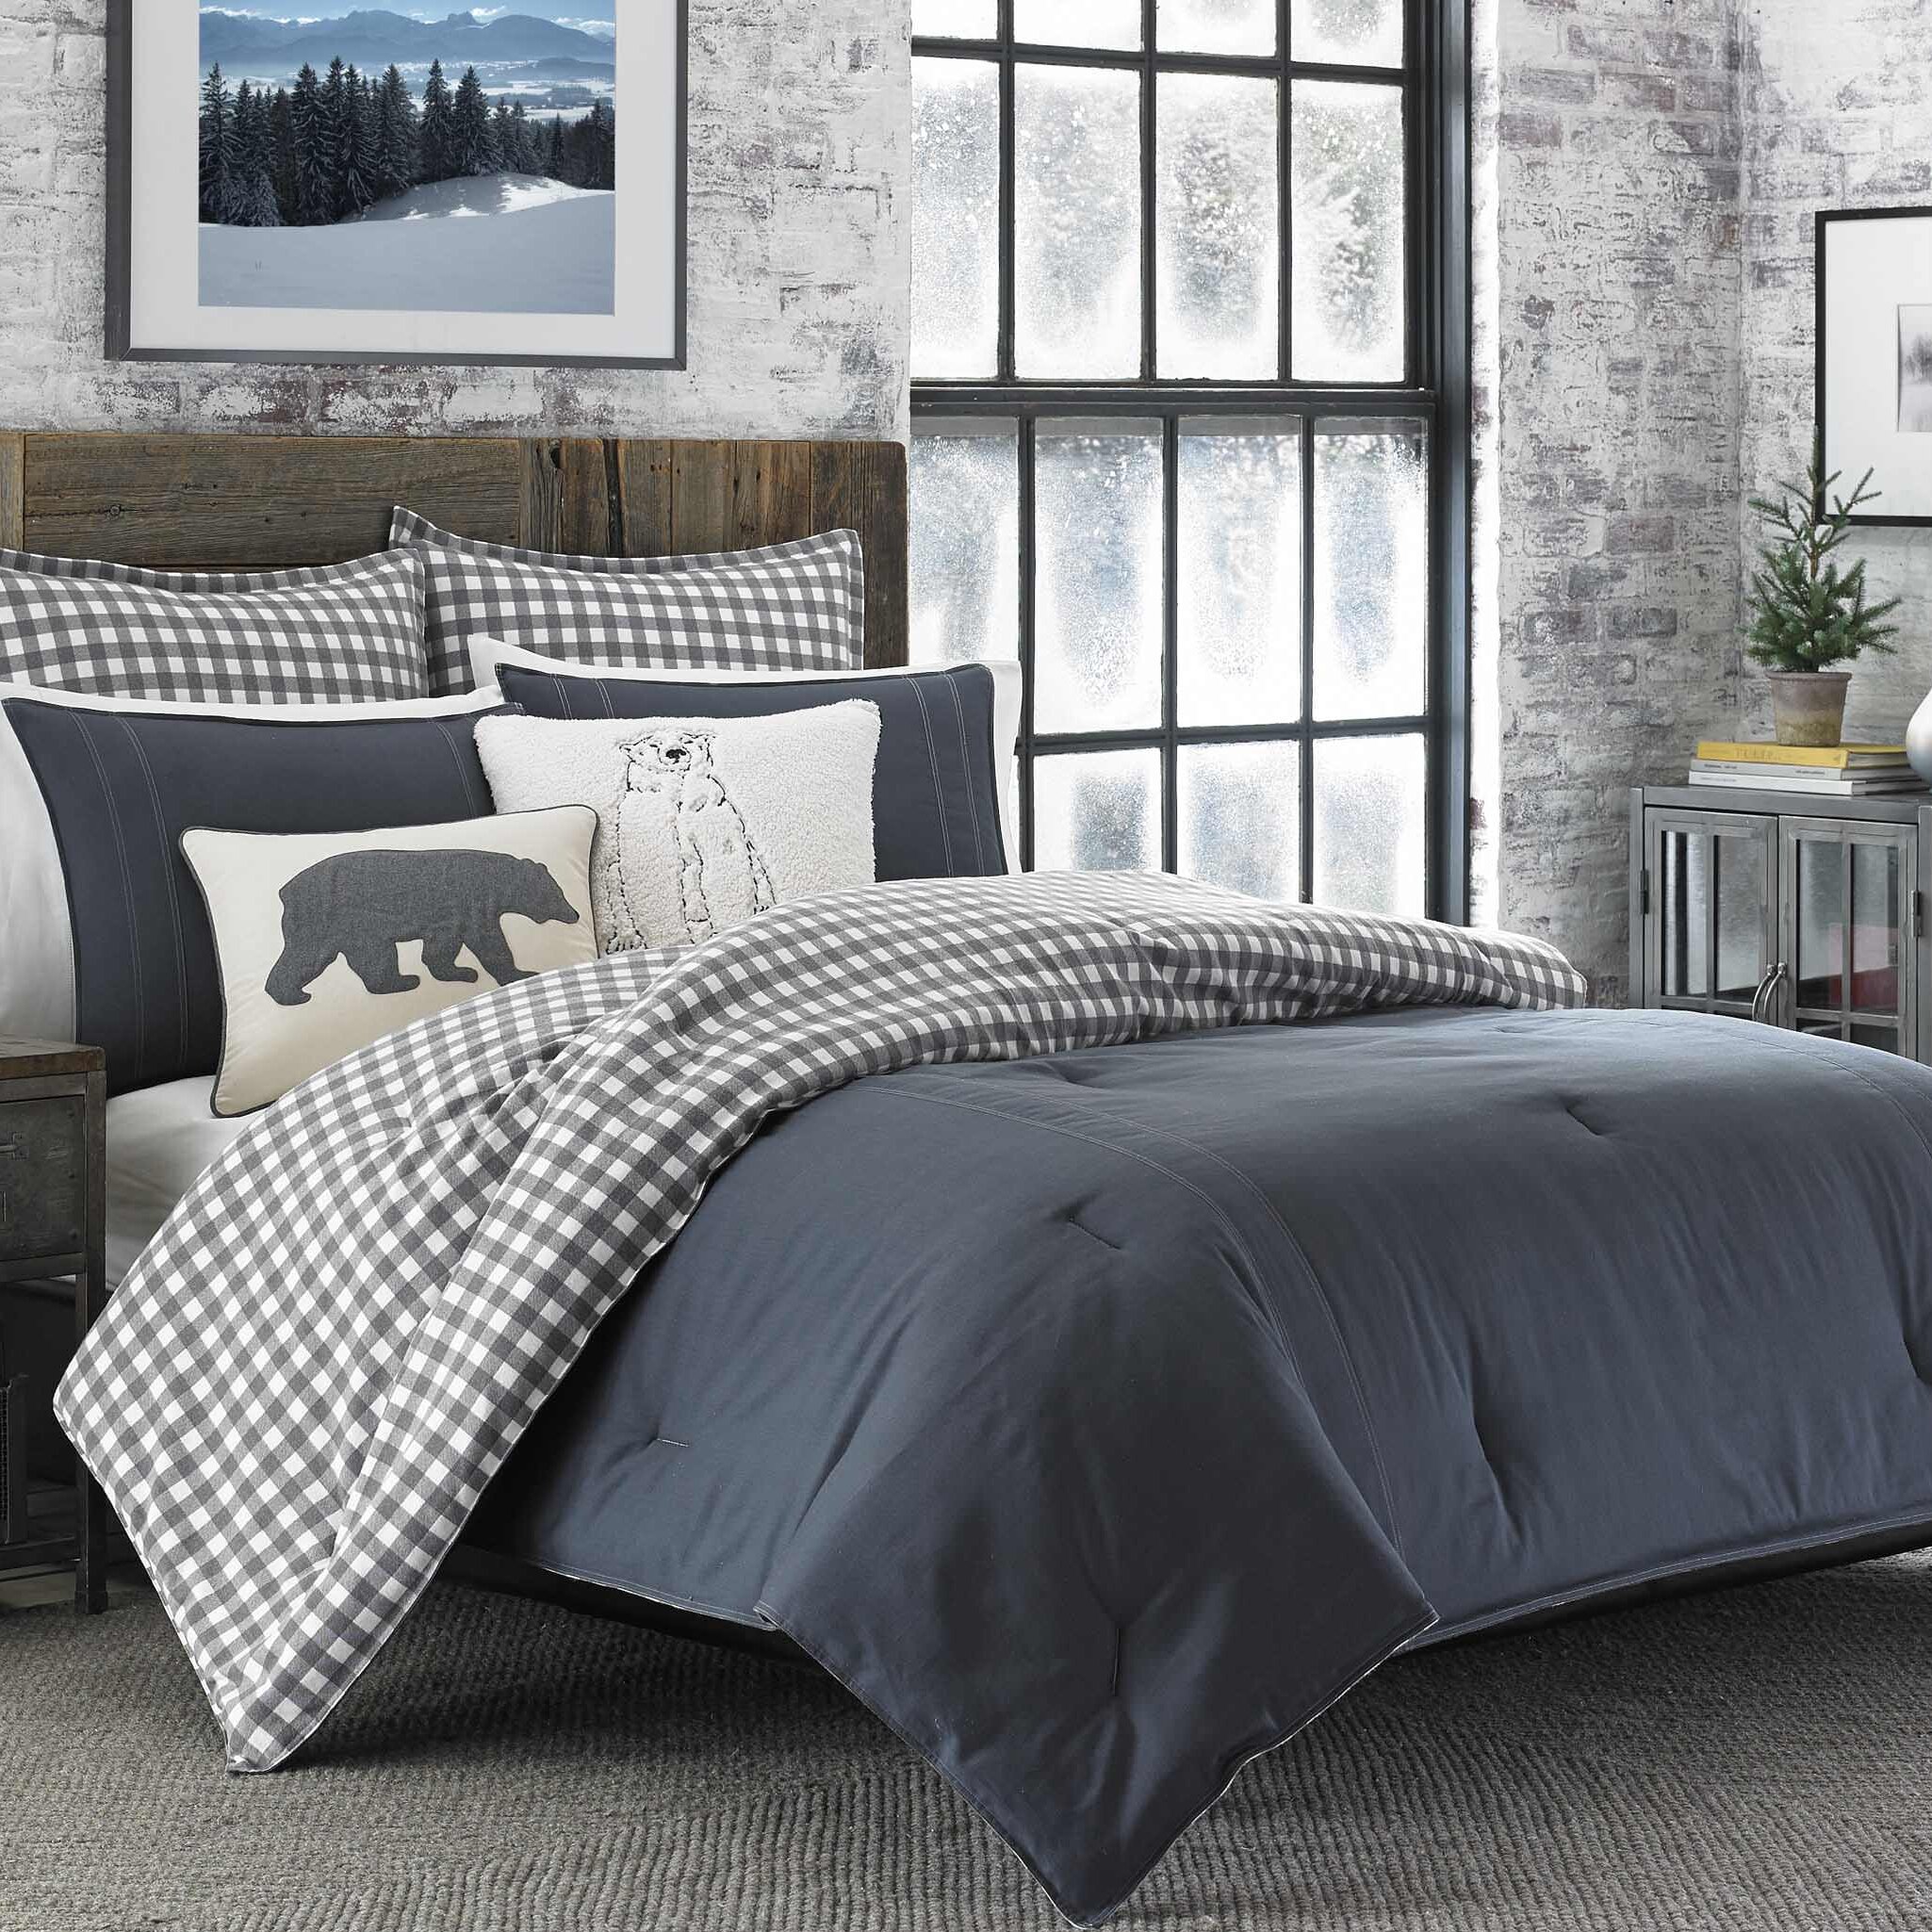 Nautica - Queen Comforter Set, Cotton Reversible Bedding with Matching  Shams, Medium Weight for All Seasons (Mineola Navy, Queen)